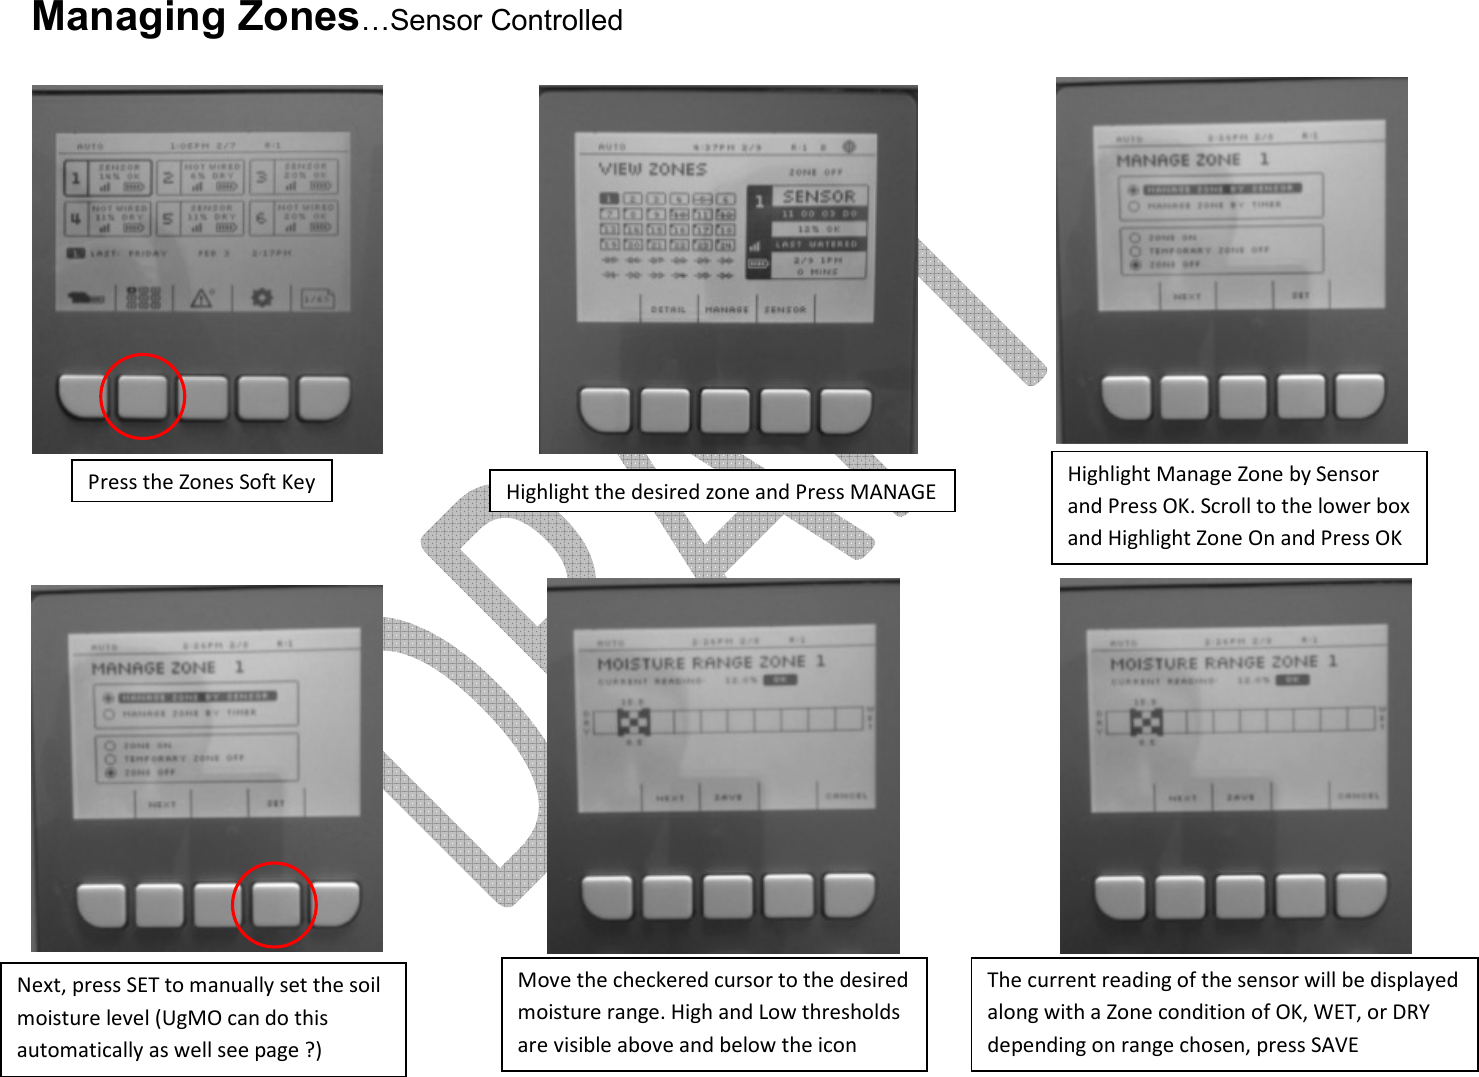     Managing Zones…Sensor Controlled                      Press the Zones Soft Key Highlight the desired zone and Press MANAGE Highlight Manage Zone by Sensor and Press OK. Scroll to the lower box and Highlight Zone On and Press OK Next, press SET to manually set the soil moisture level (UgMO can do this automatically as well see page ?) Move the checkered cursor to the desired moisture range. High and Low thresholds are visible above and below the icon The current reading of the sensor will be displayed along with a Zone condition of OK, WET, or DRY depending on range chosen, press SAVE 